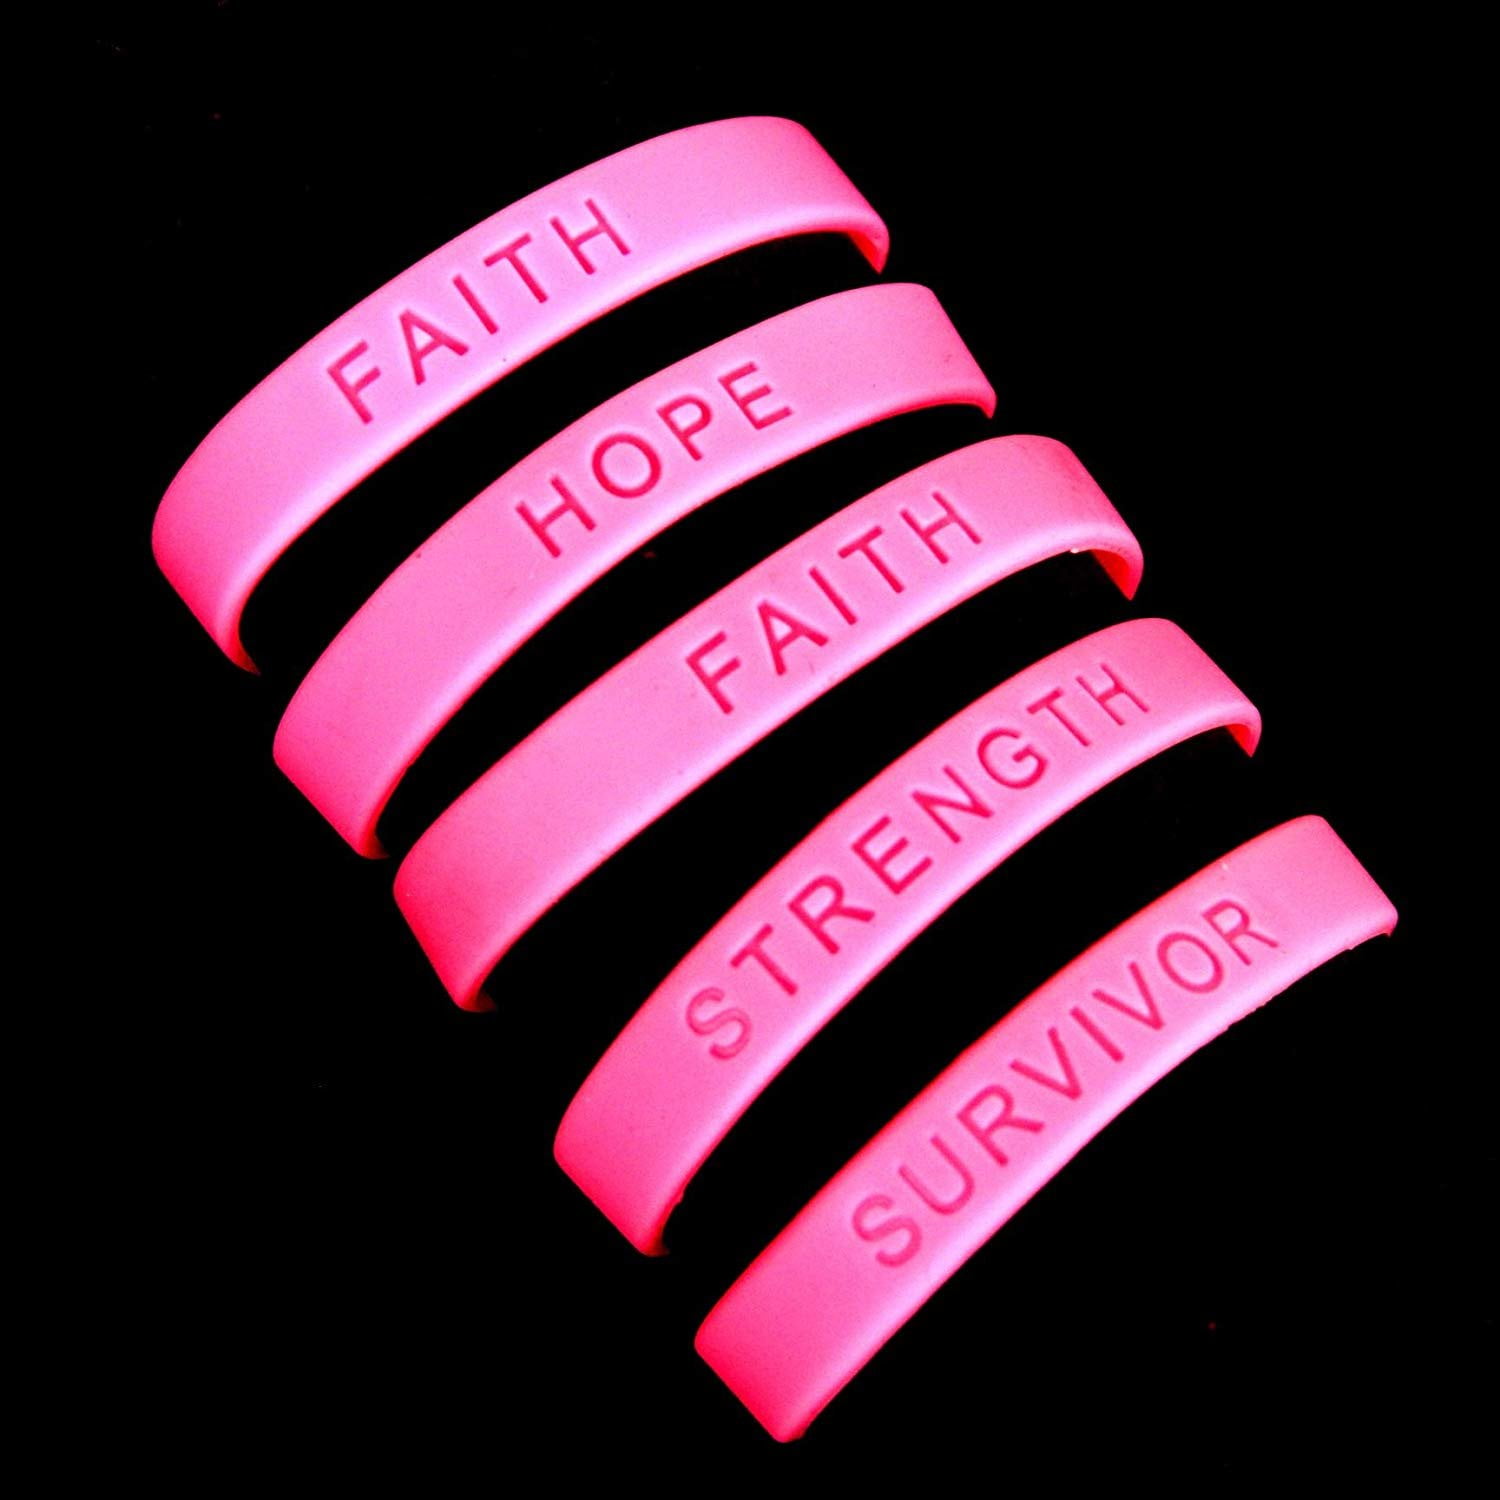 Think Pink Breast Cancer Awareness Silicone Wristbands Benefits Charity  TK3-2 | eBay